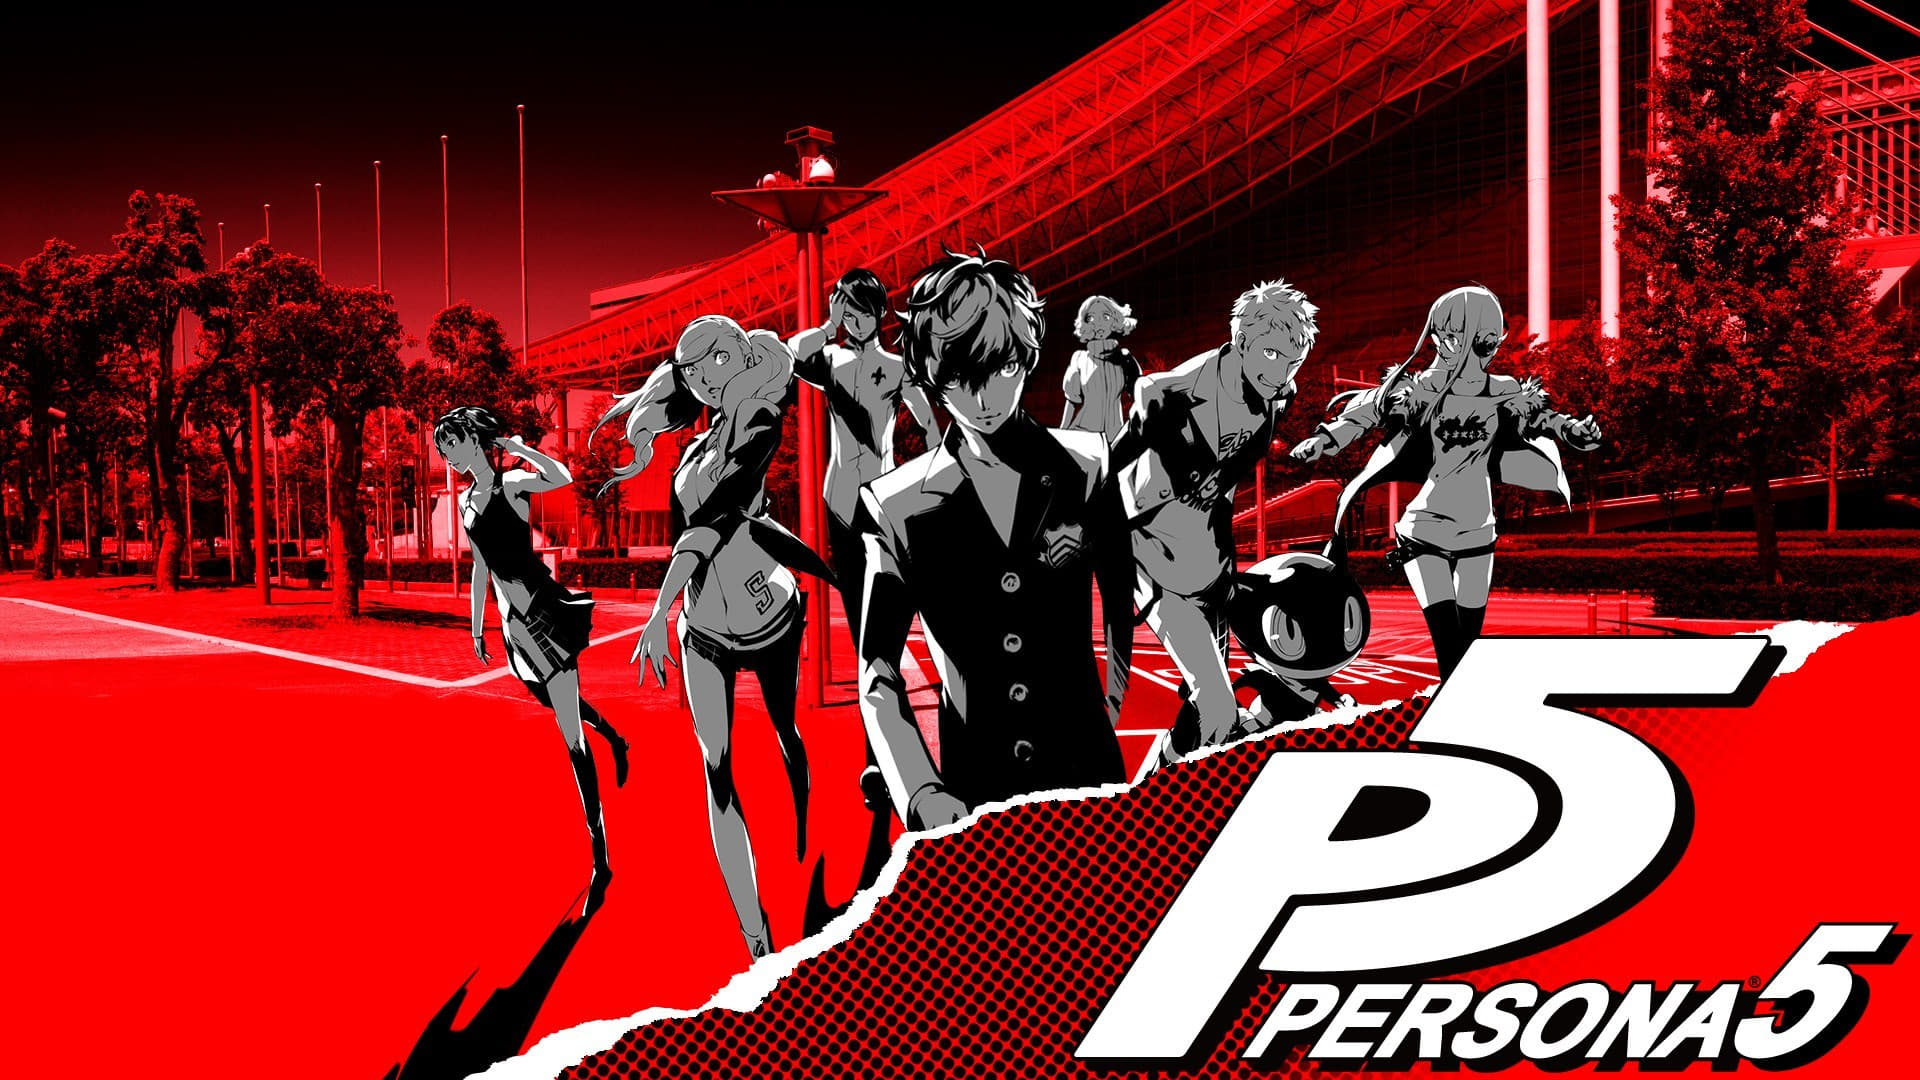 Persona 5 the Animation: The Day Breakers 2016 123movies